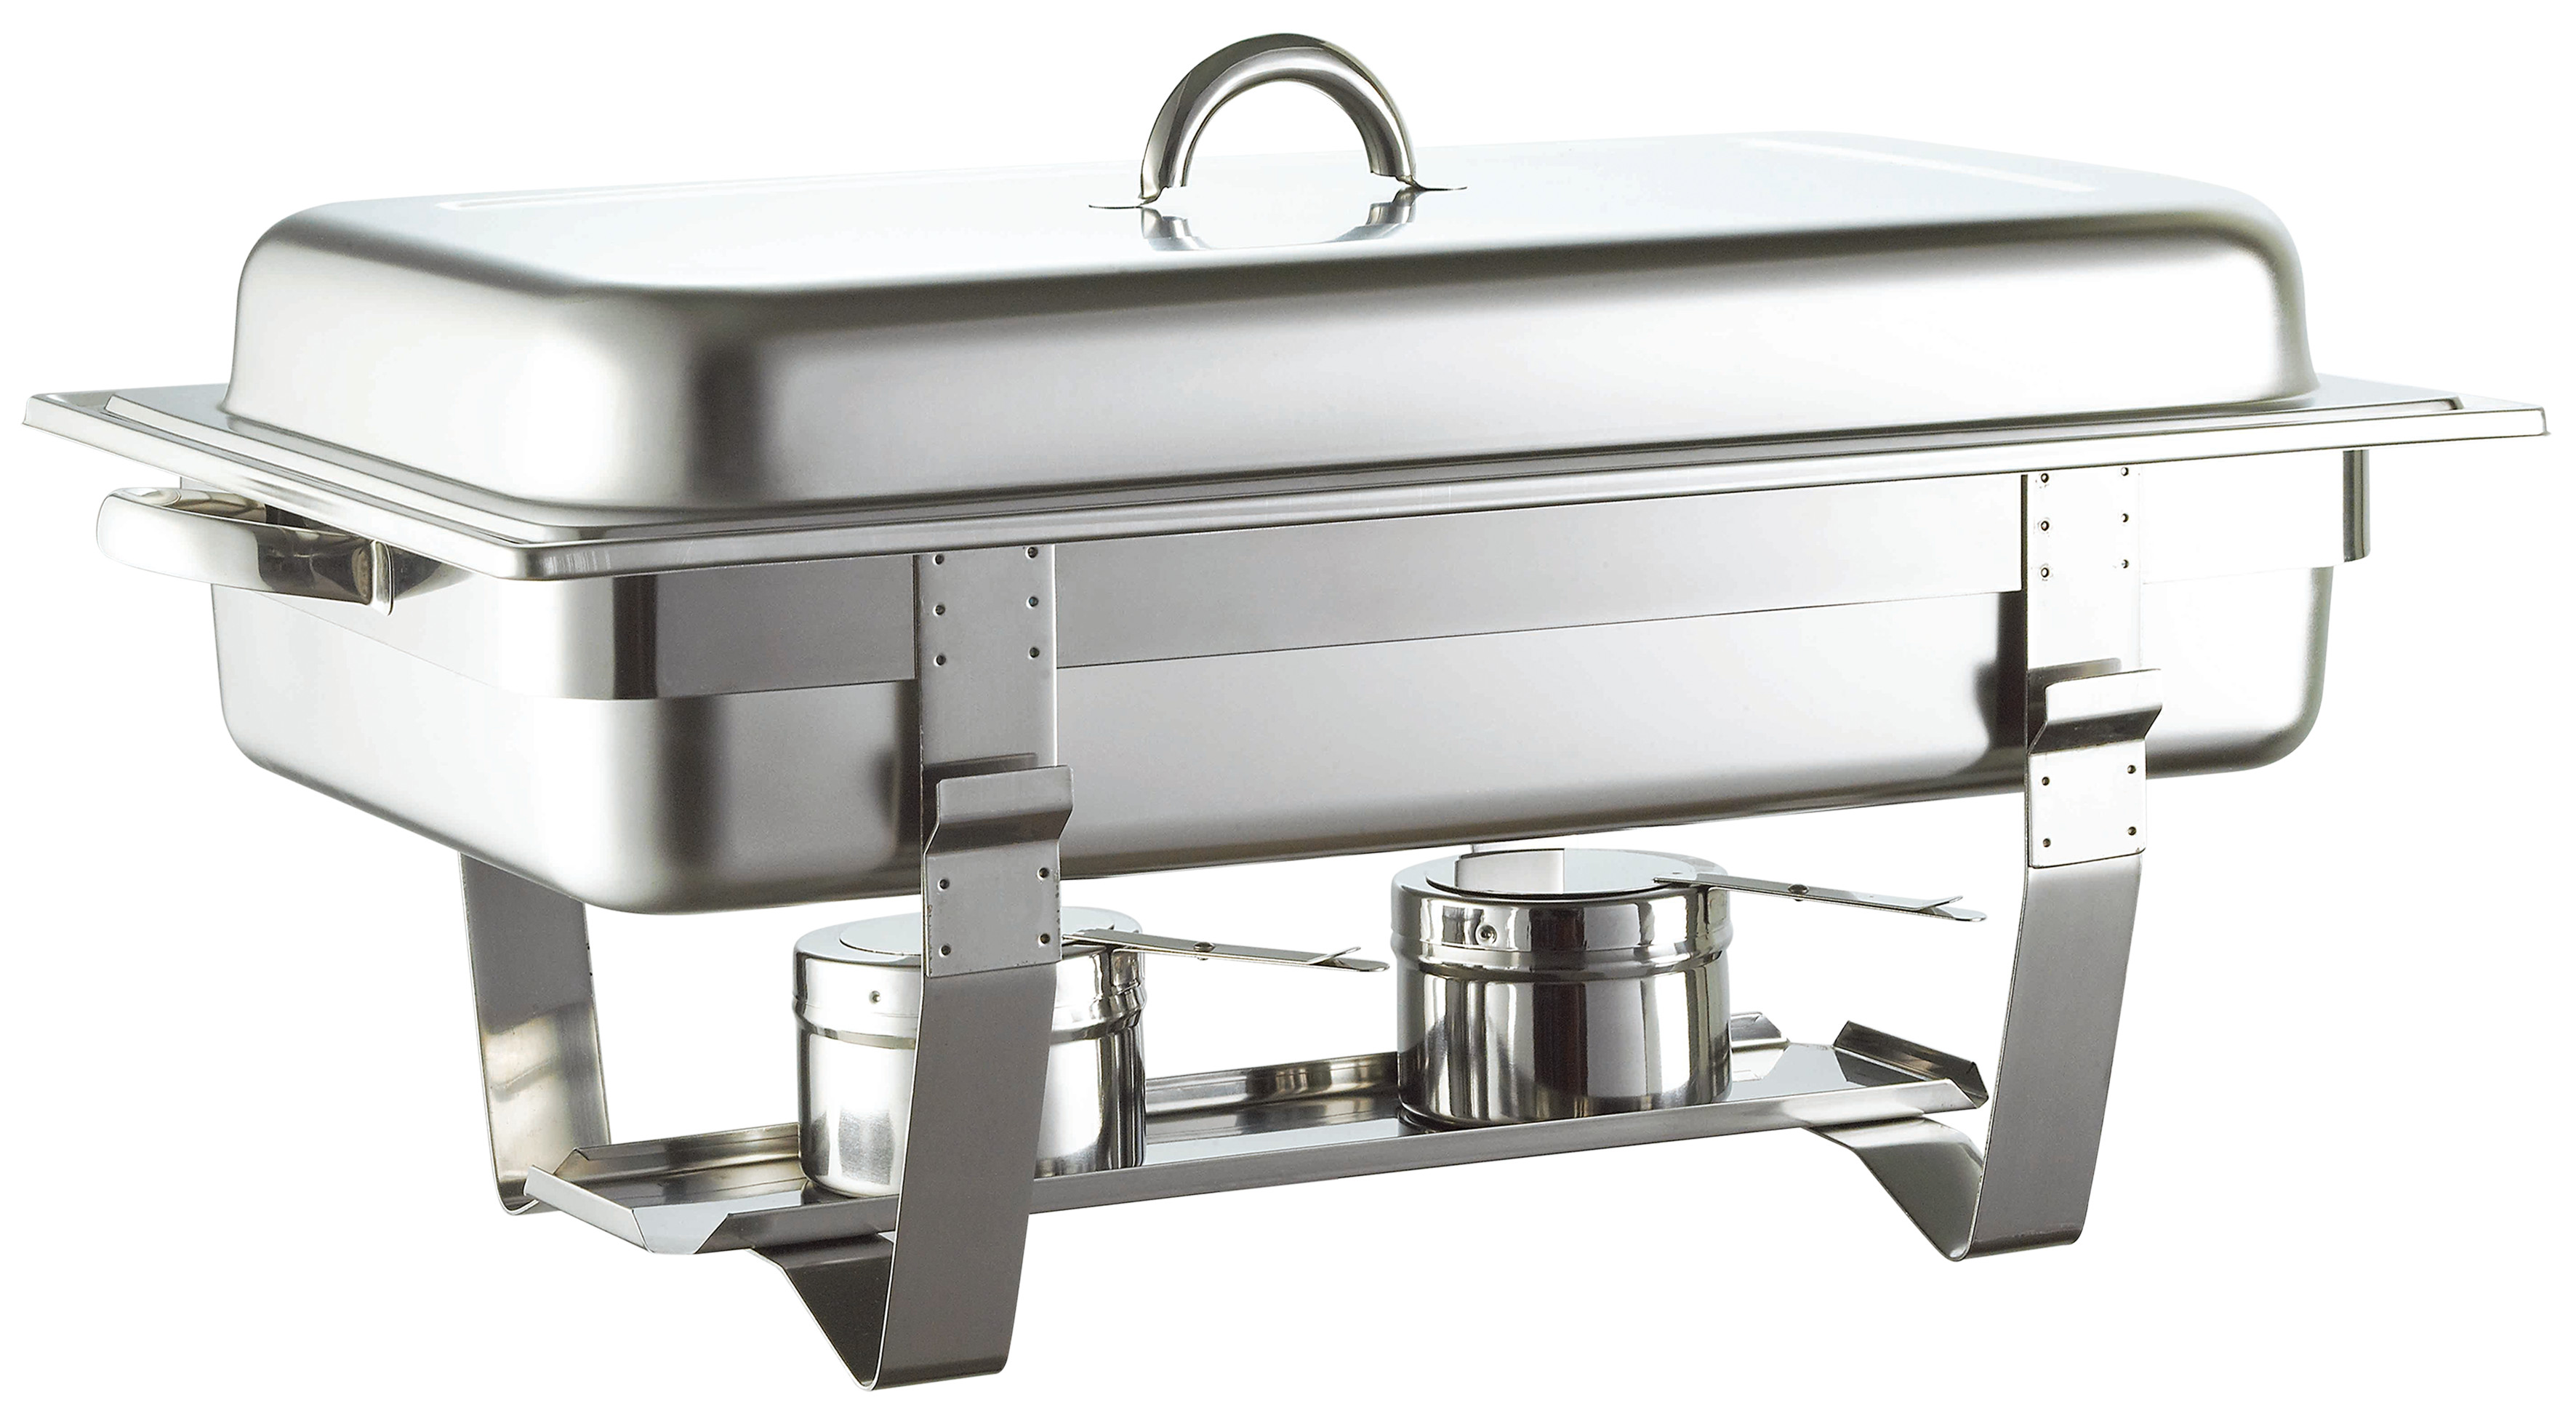 9 liter good quality economic stainless steel chafing dish/buffet stove for sale